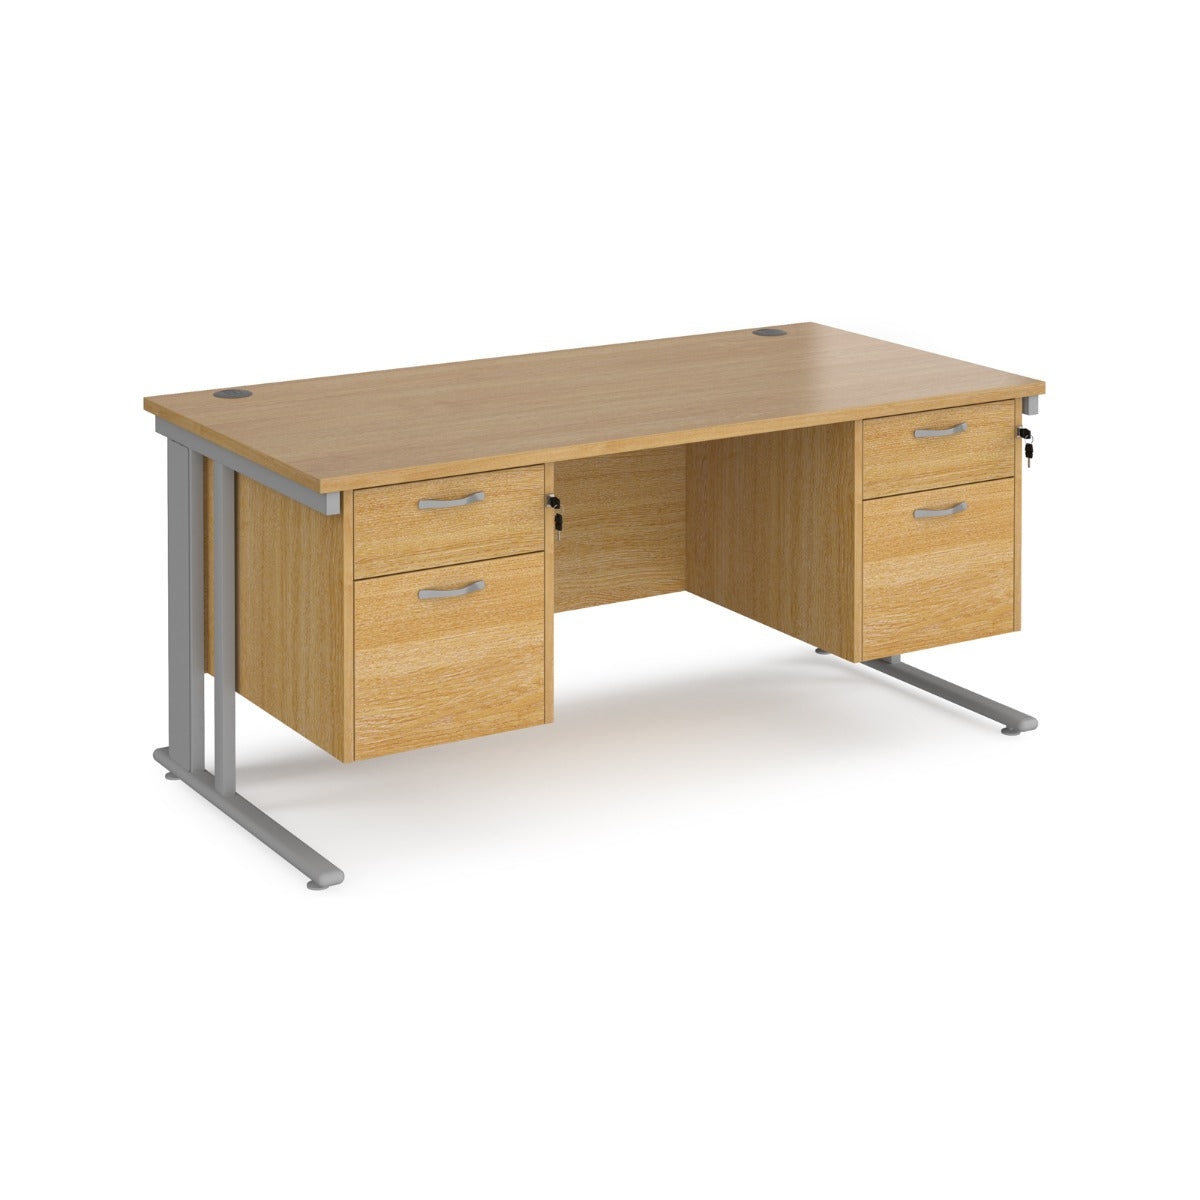 Maestro 800mm Deep Straight Cable Management Leg Office Desk with Two and Two Drawer Pedestal